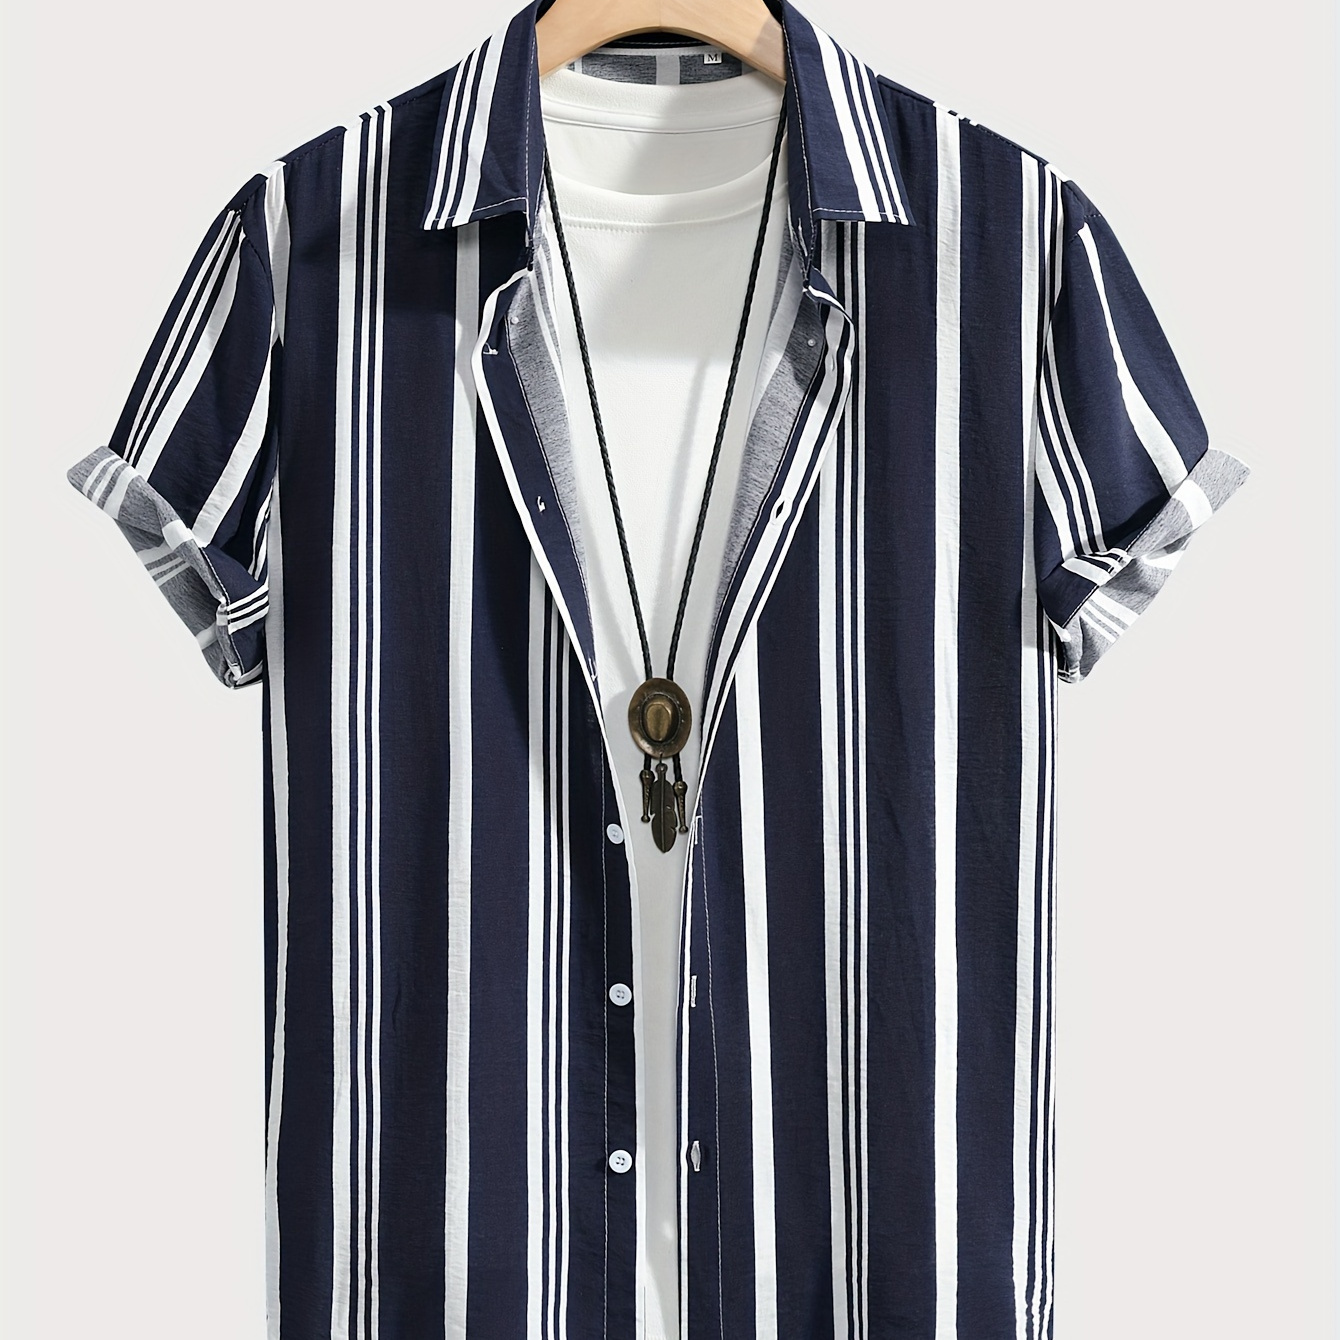 

Men's Stripe Pattern Print Lapel Shirt With Short Sleeve And Button Down Placket, Classic And Trendy Tops For Summer Leisurewear